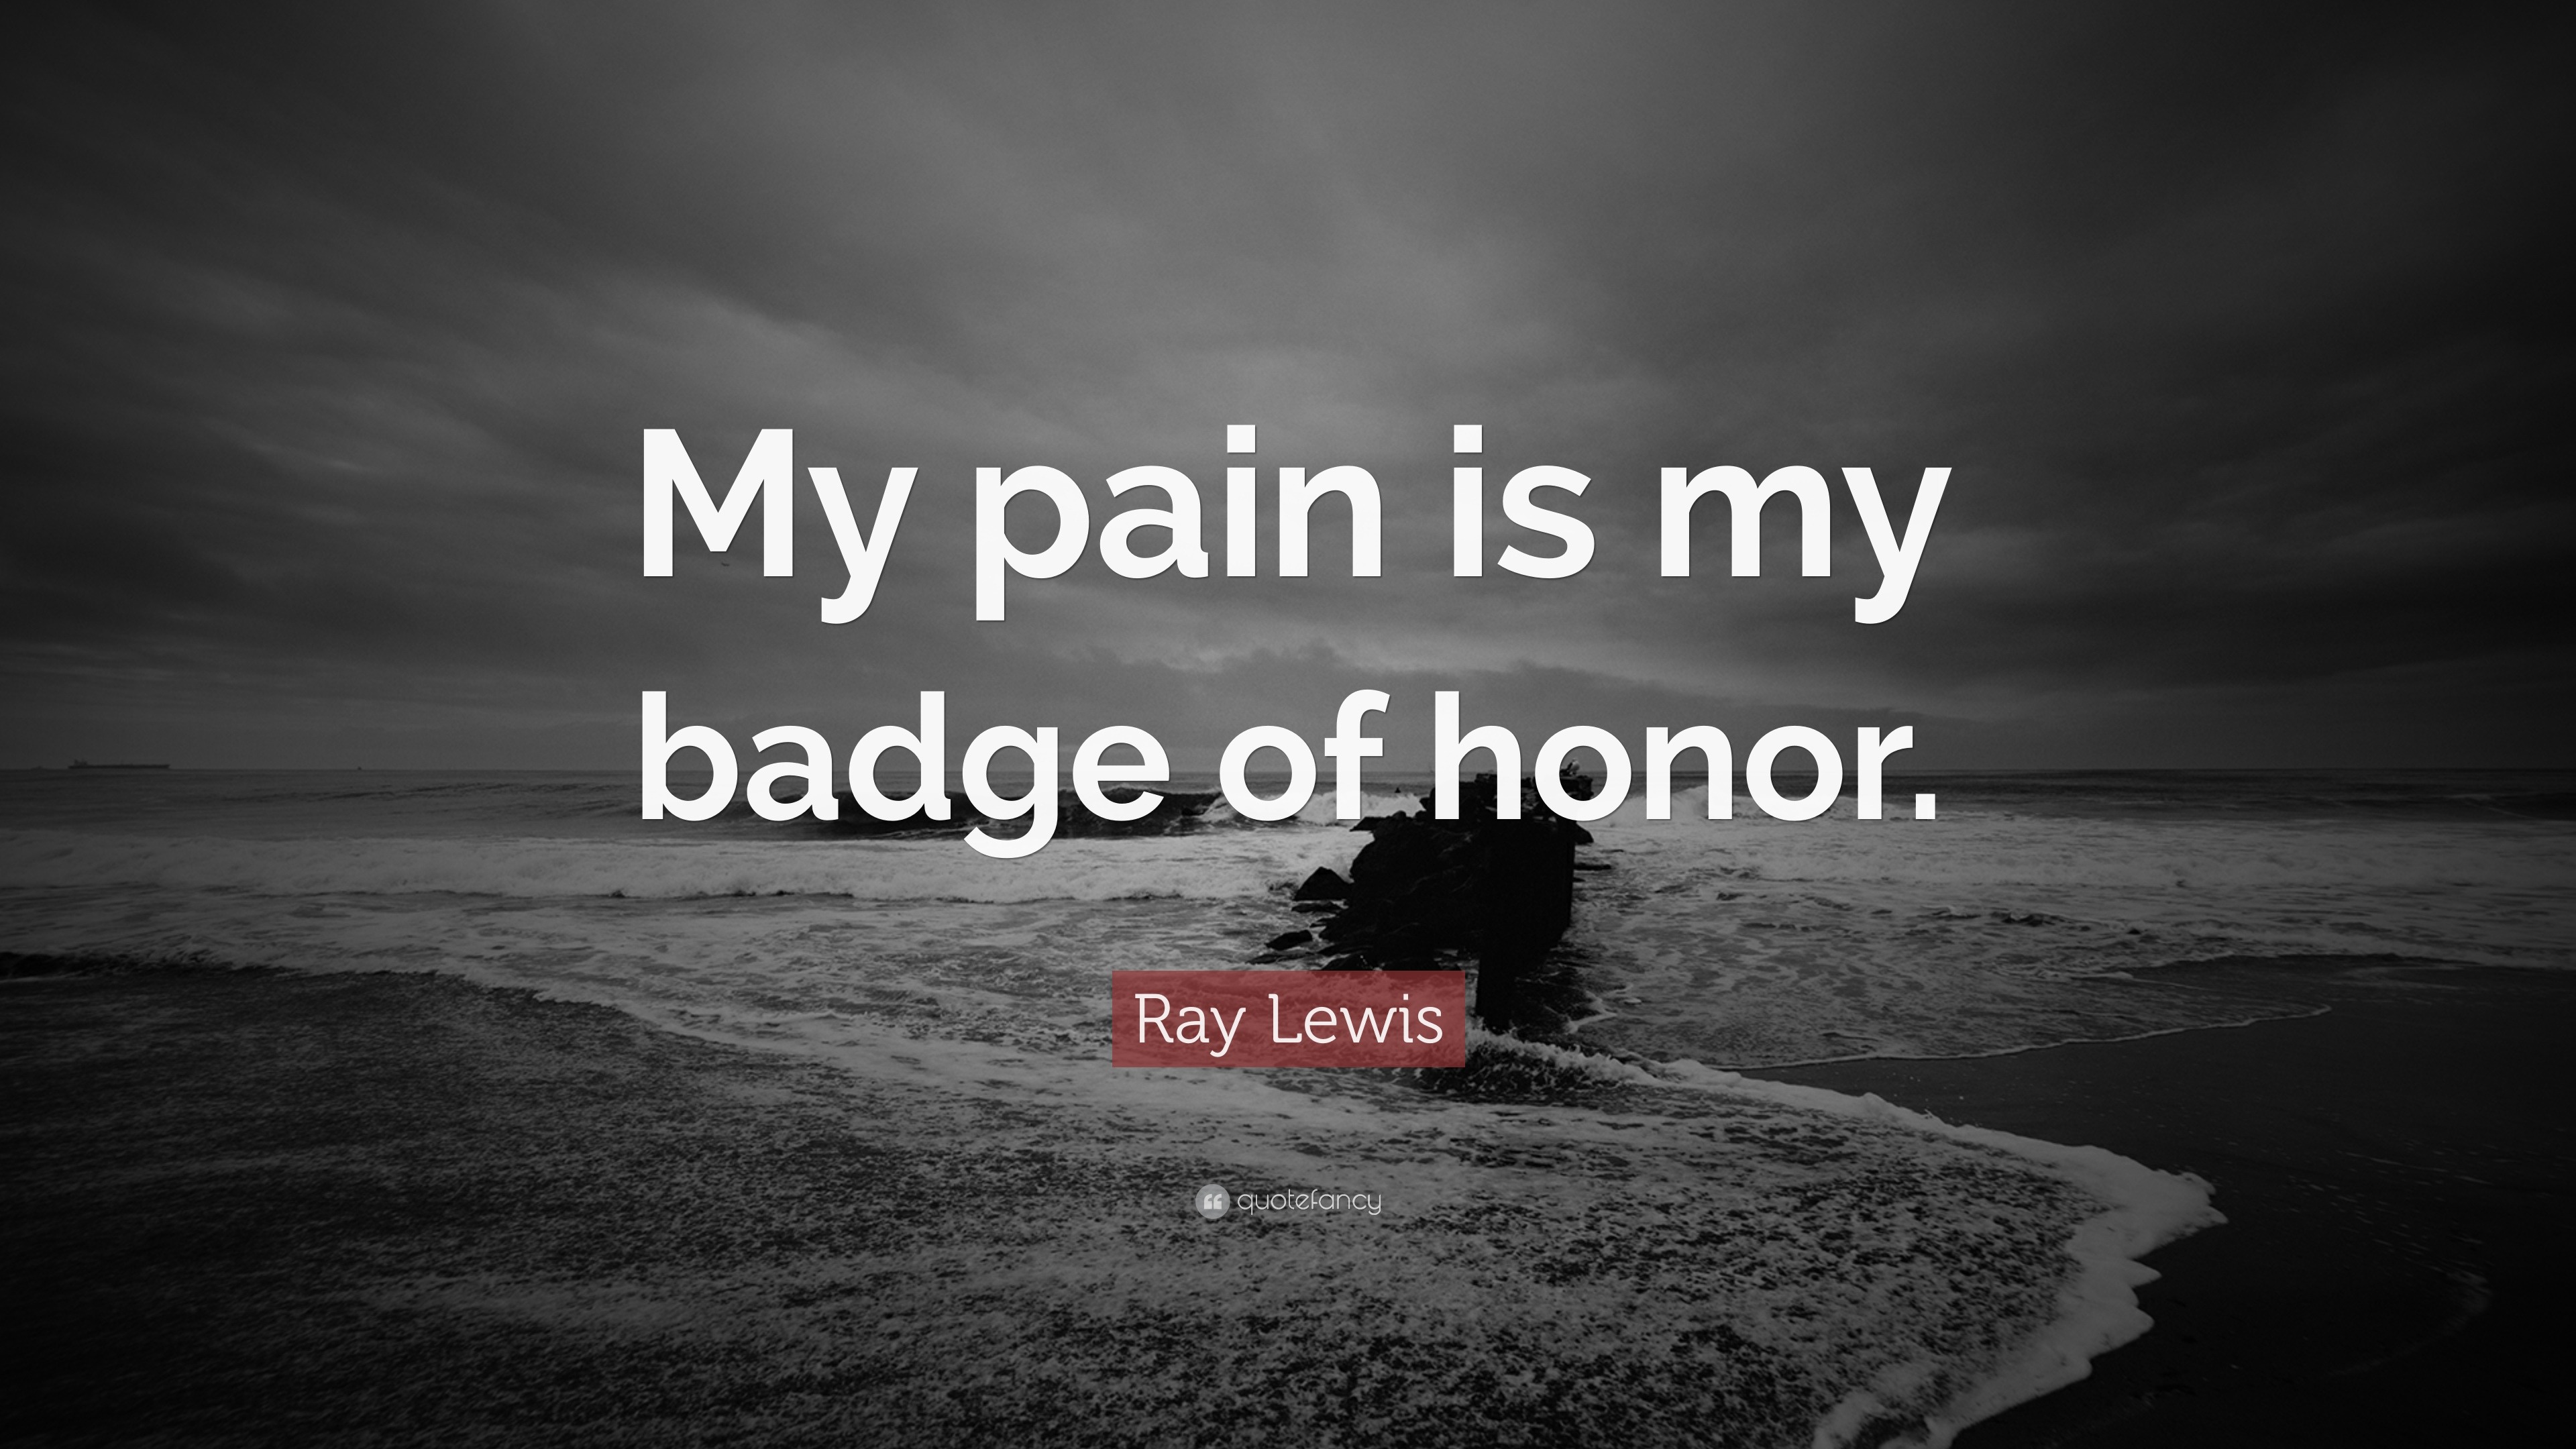 Ray Lewis Quotes (100 wallpapers) Quotefancy